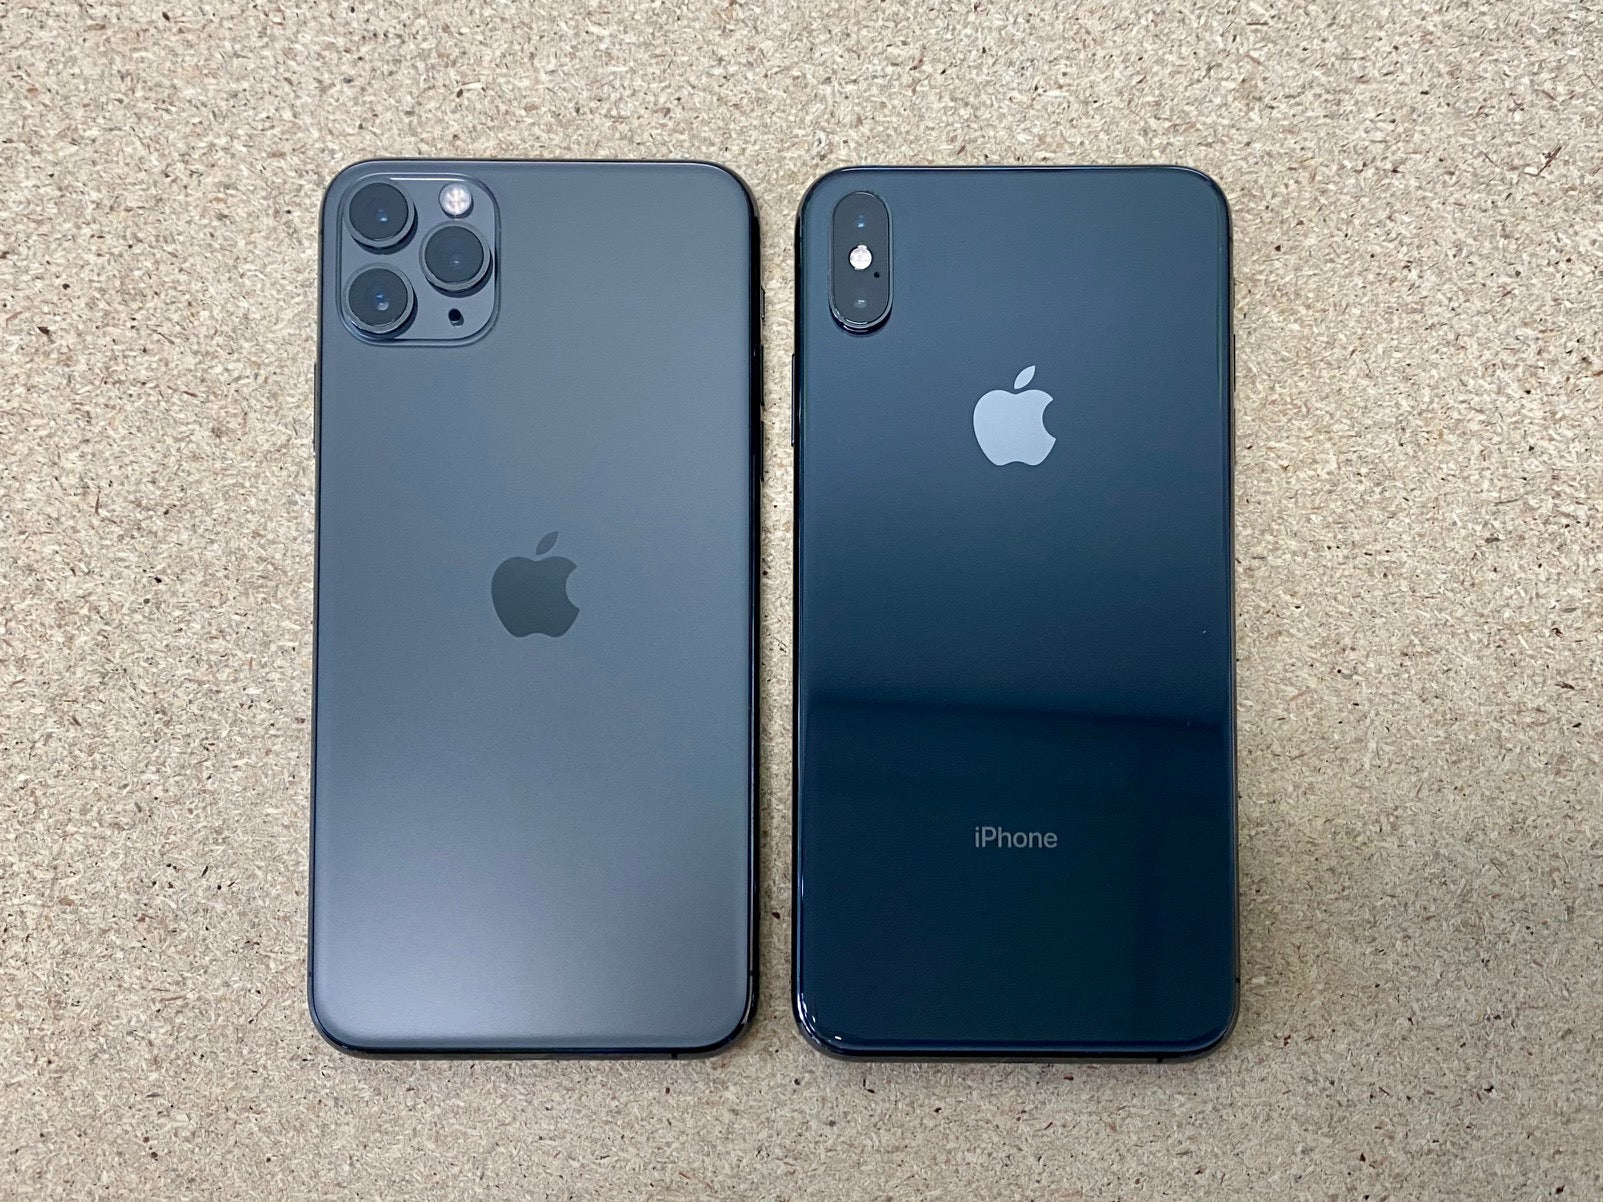 Apple iPhone 11 Pro vs iPhone XS: What's the difference?